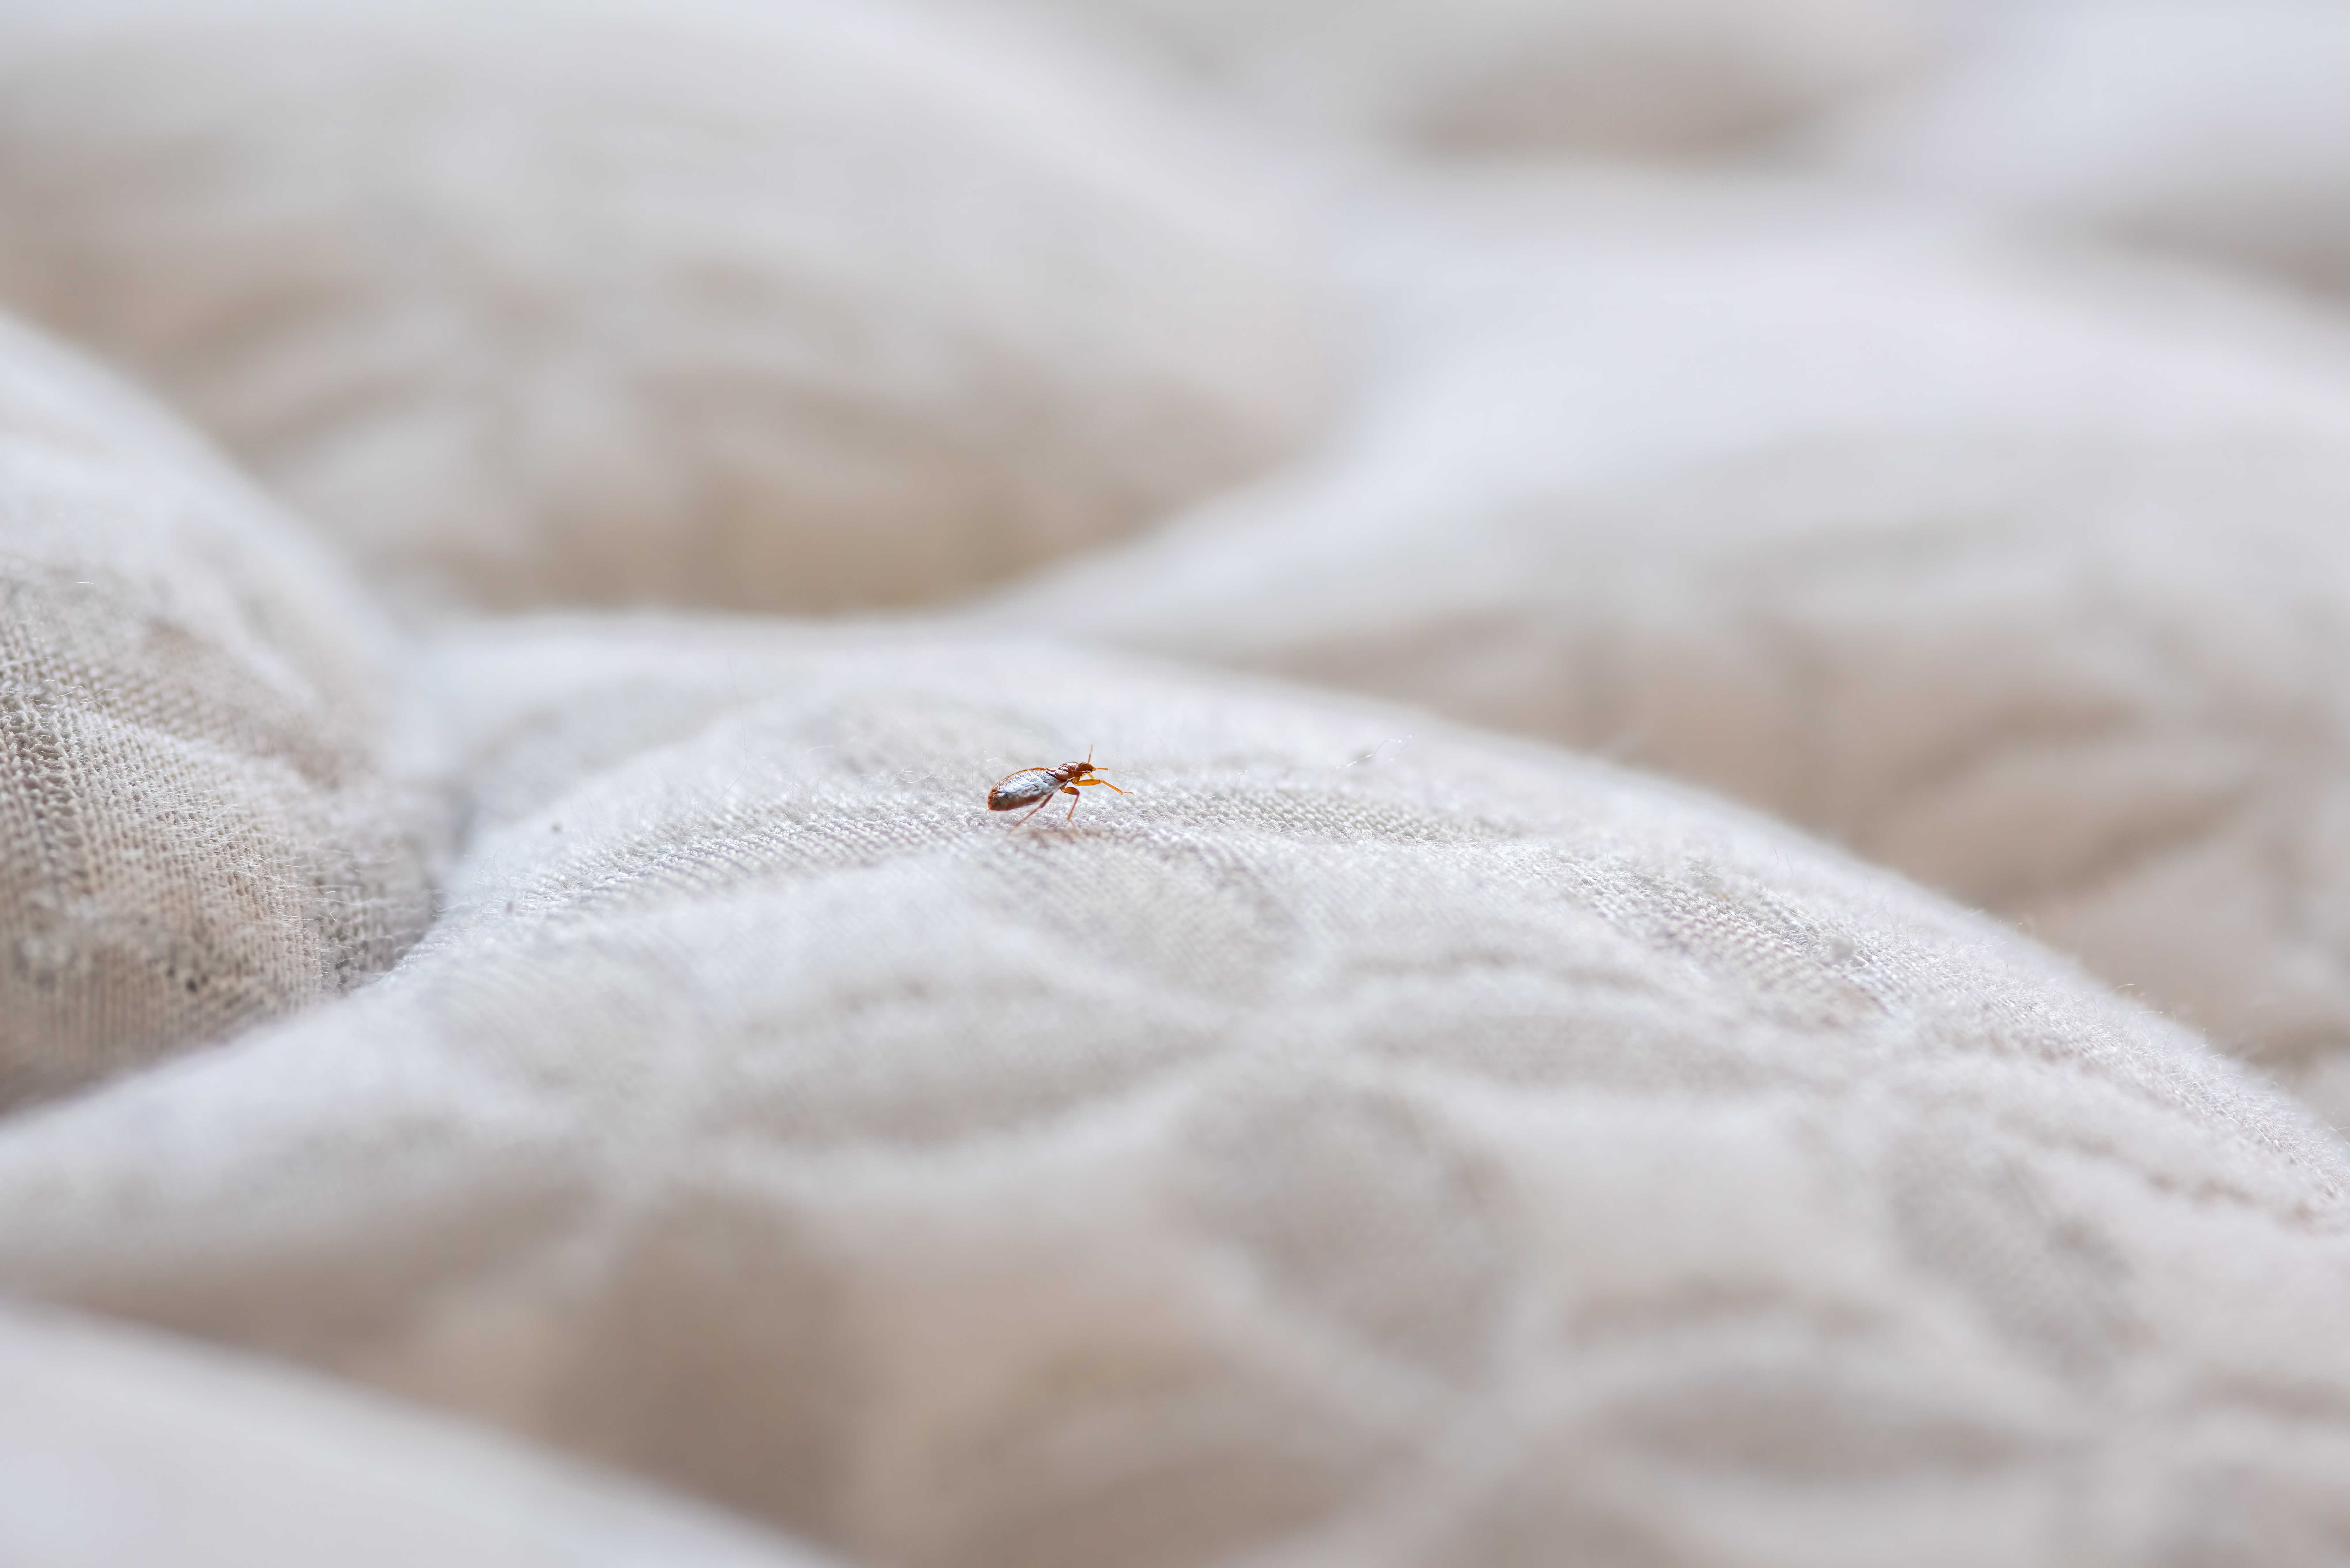 A bed bug on a bed - GGA Pest Management provides bed bug control in Killeen, TX.